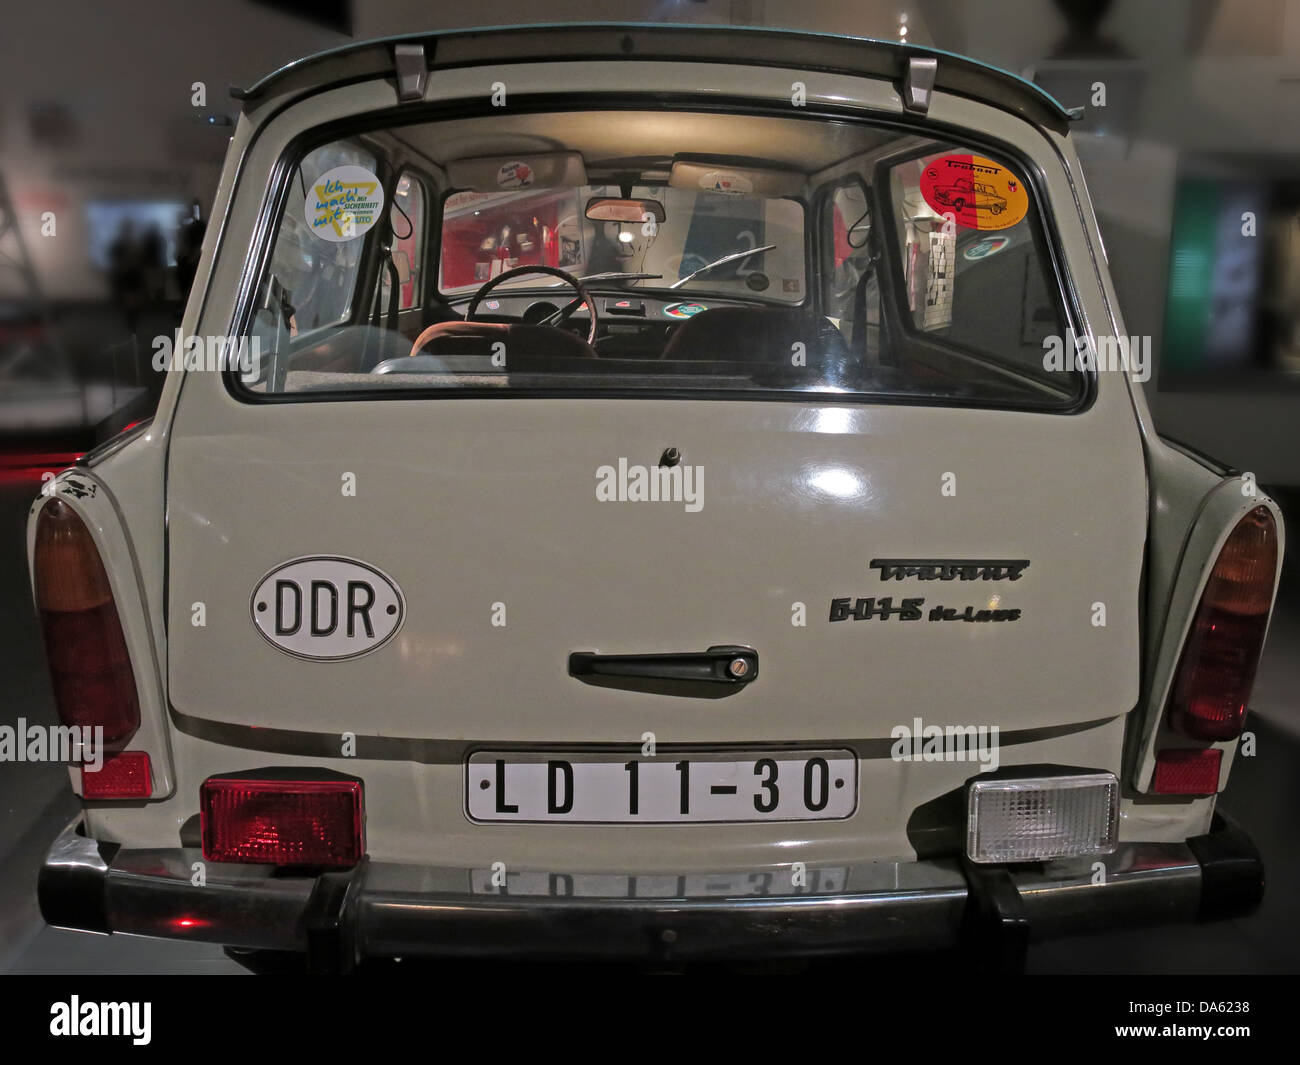 A Trabant car from the DDR, former East Germany in communism times, under control of the CCCP / USSR - LD1130 - LD 11-30 Stock Photo